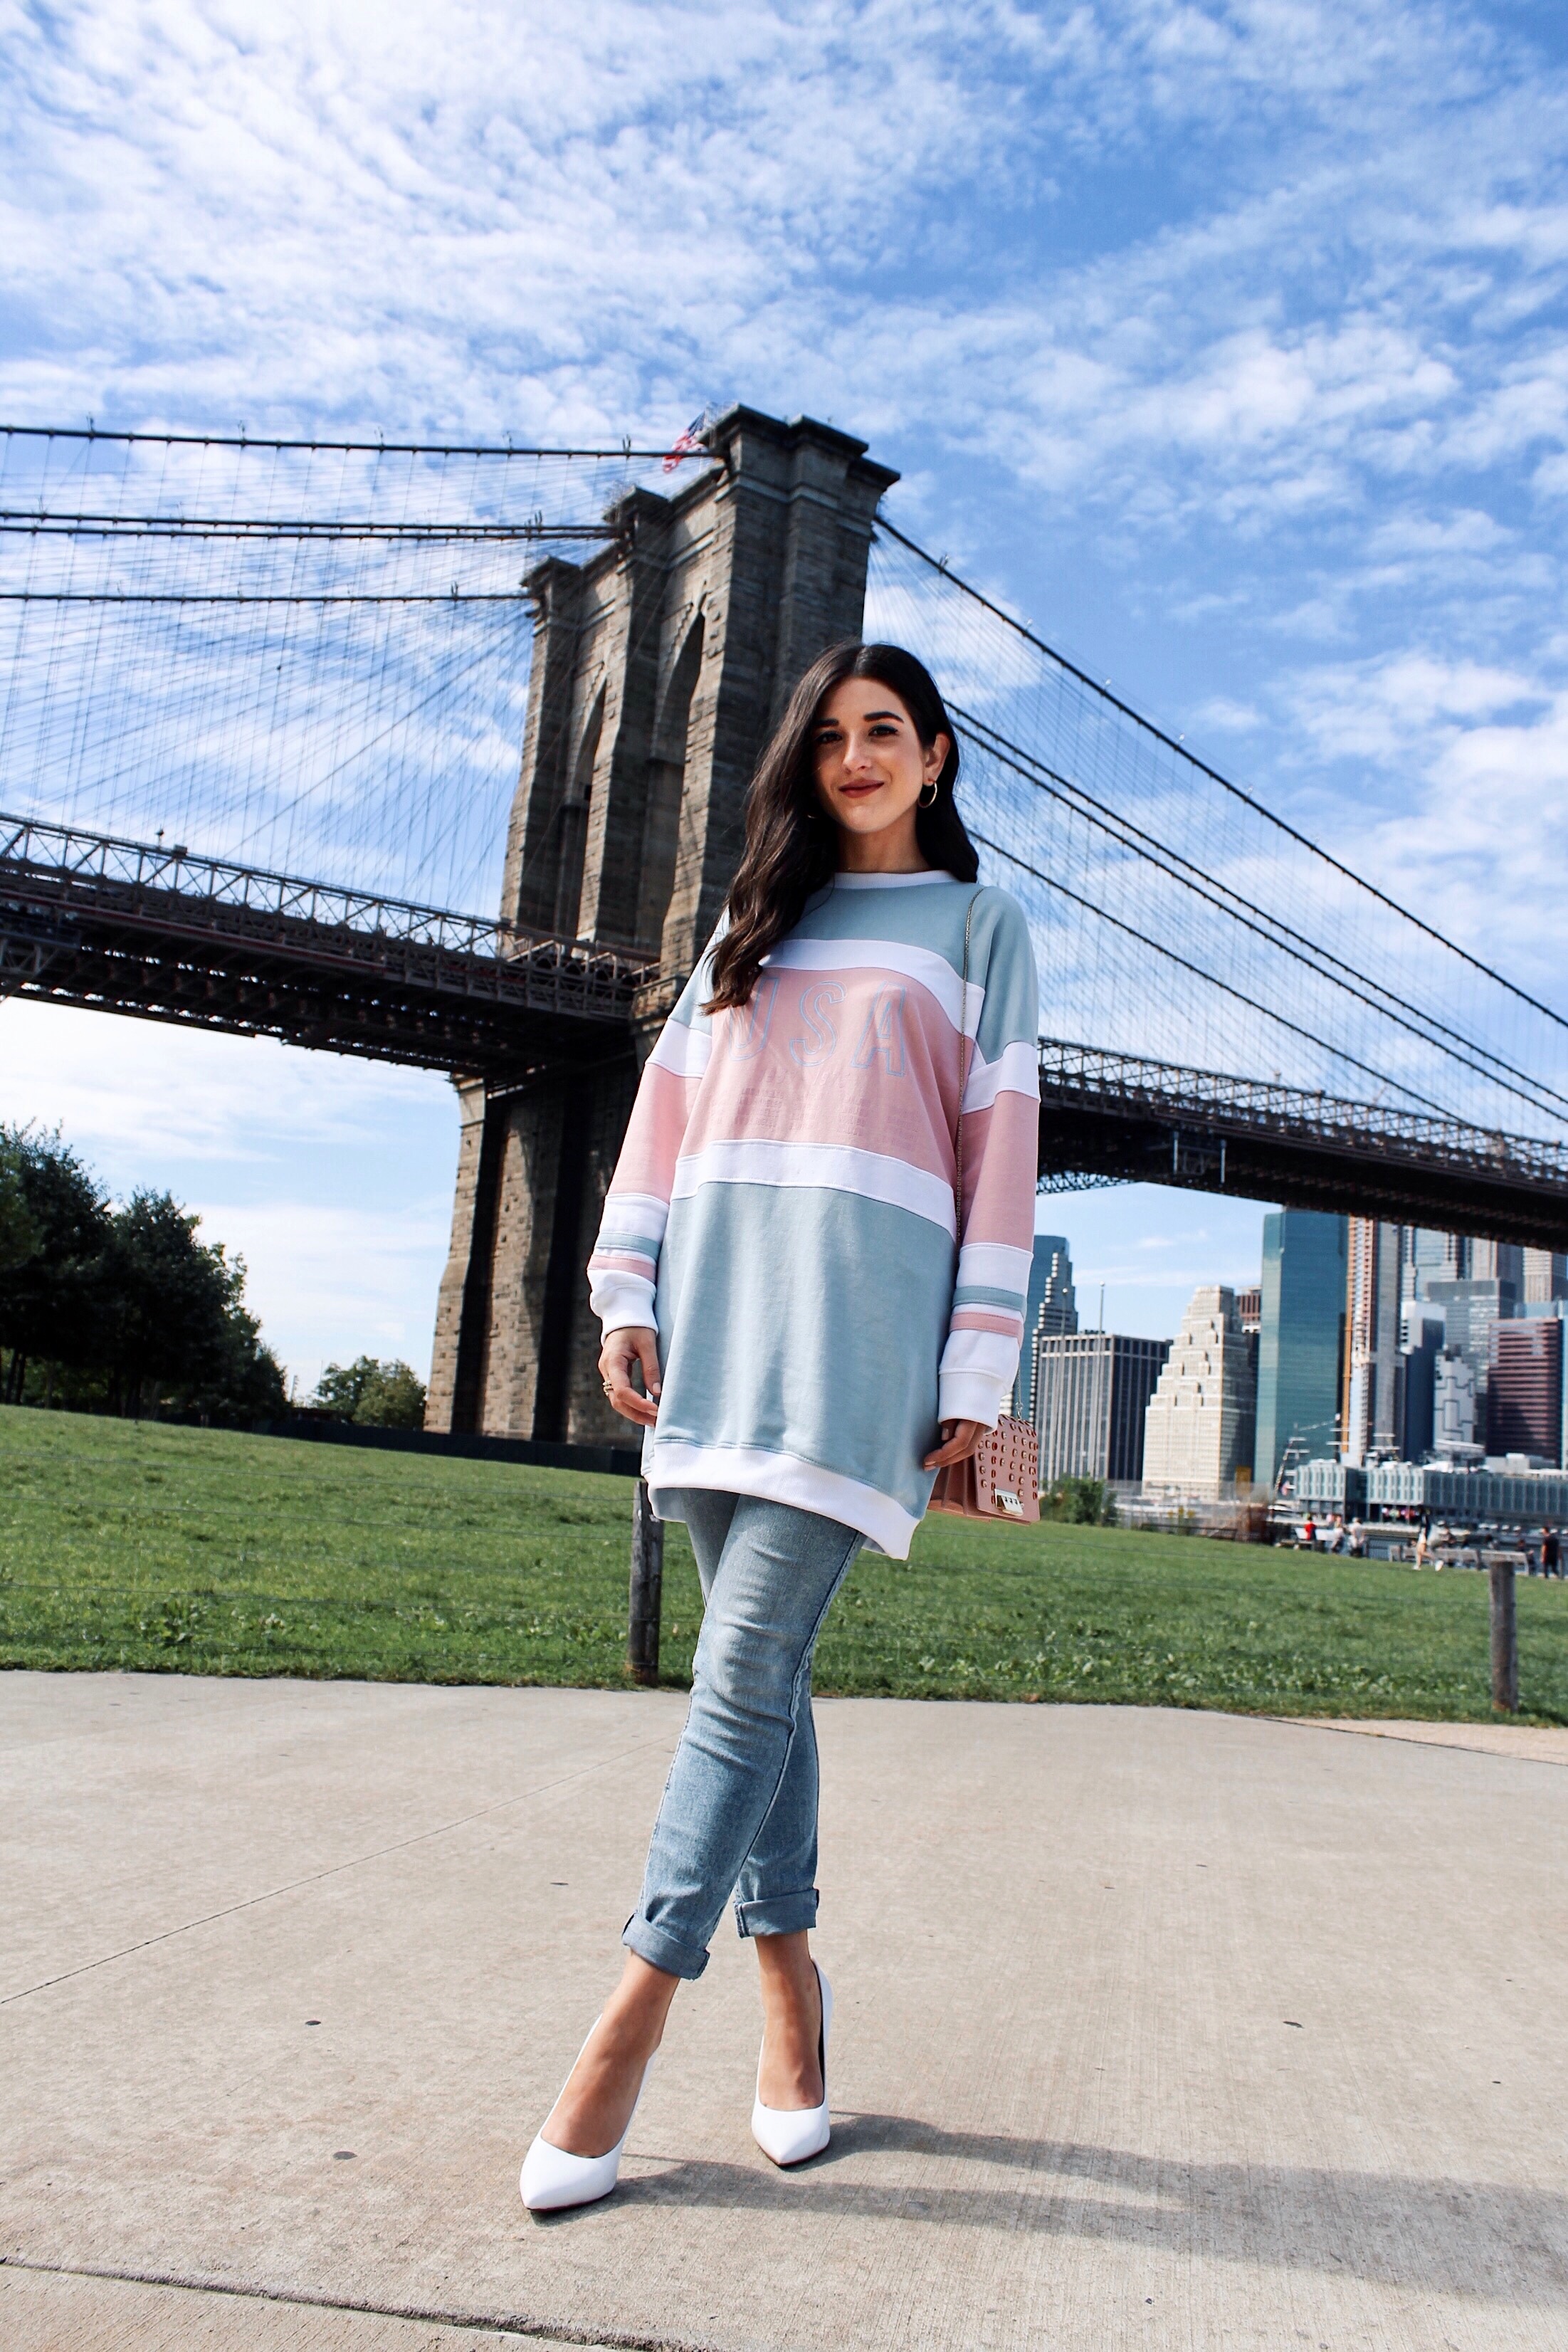 How To Style Kenneth Cole's White Riley Heels Esther Santer Fashion Blog NYC Street Style Blogger Outfit OOTD Trendy Brand Collaboration Comfortable Casual Wear Jeans Oversized Sweatshirt Pink Zac Posen Bag Girl Women  Dumbo Photoshoot Carousel Bridge.jpg